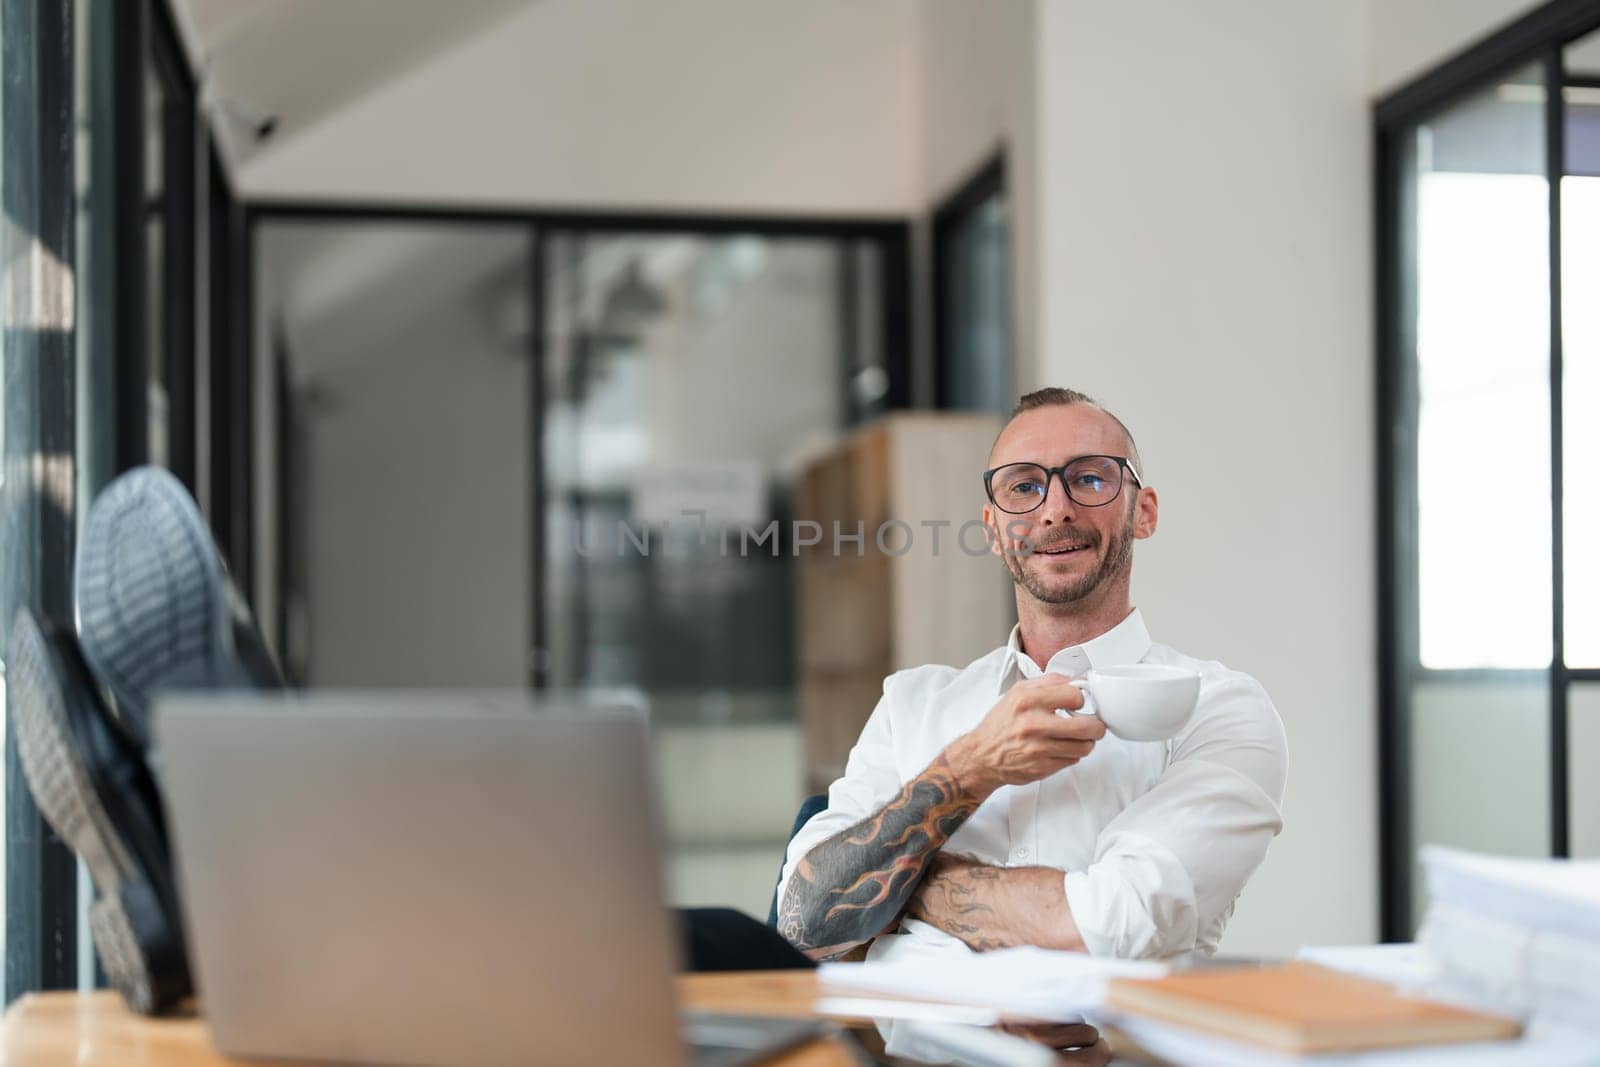 Portrait of successful business man, businessman in glasses and business suit looking at camera and smiling.